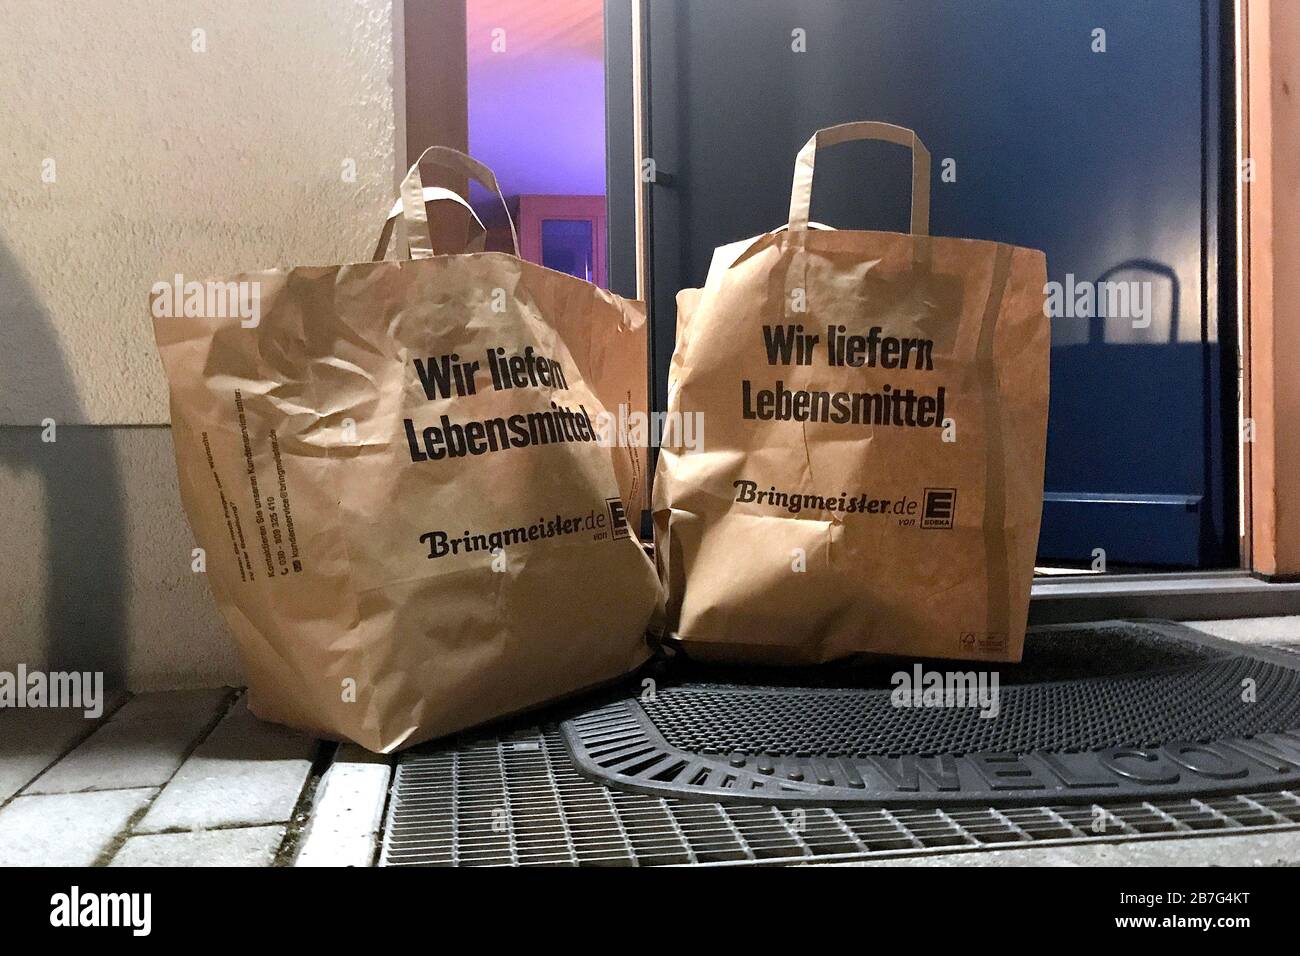 Munich, Deutschland. 16th Mar, 2020. EDEKA delivery service  Bringmeister.de, order Lebenswithtel online and have it delivered to your  door in times of the corona virus pandemic. Paper carrier bags, paper bags,  shopping